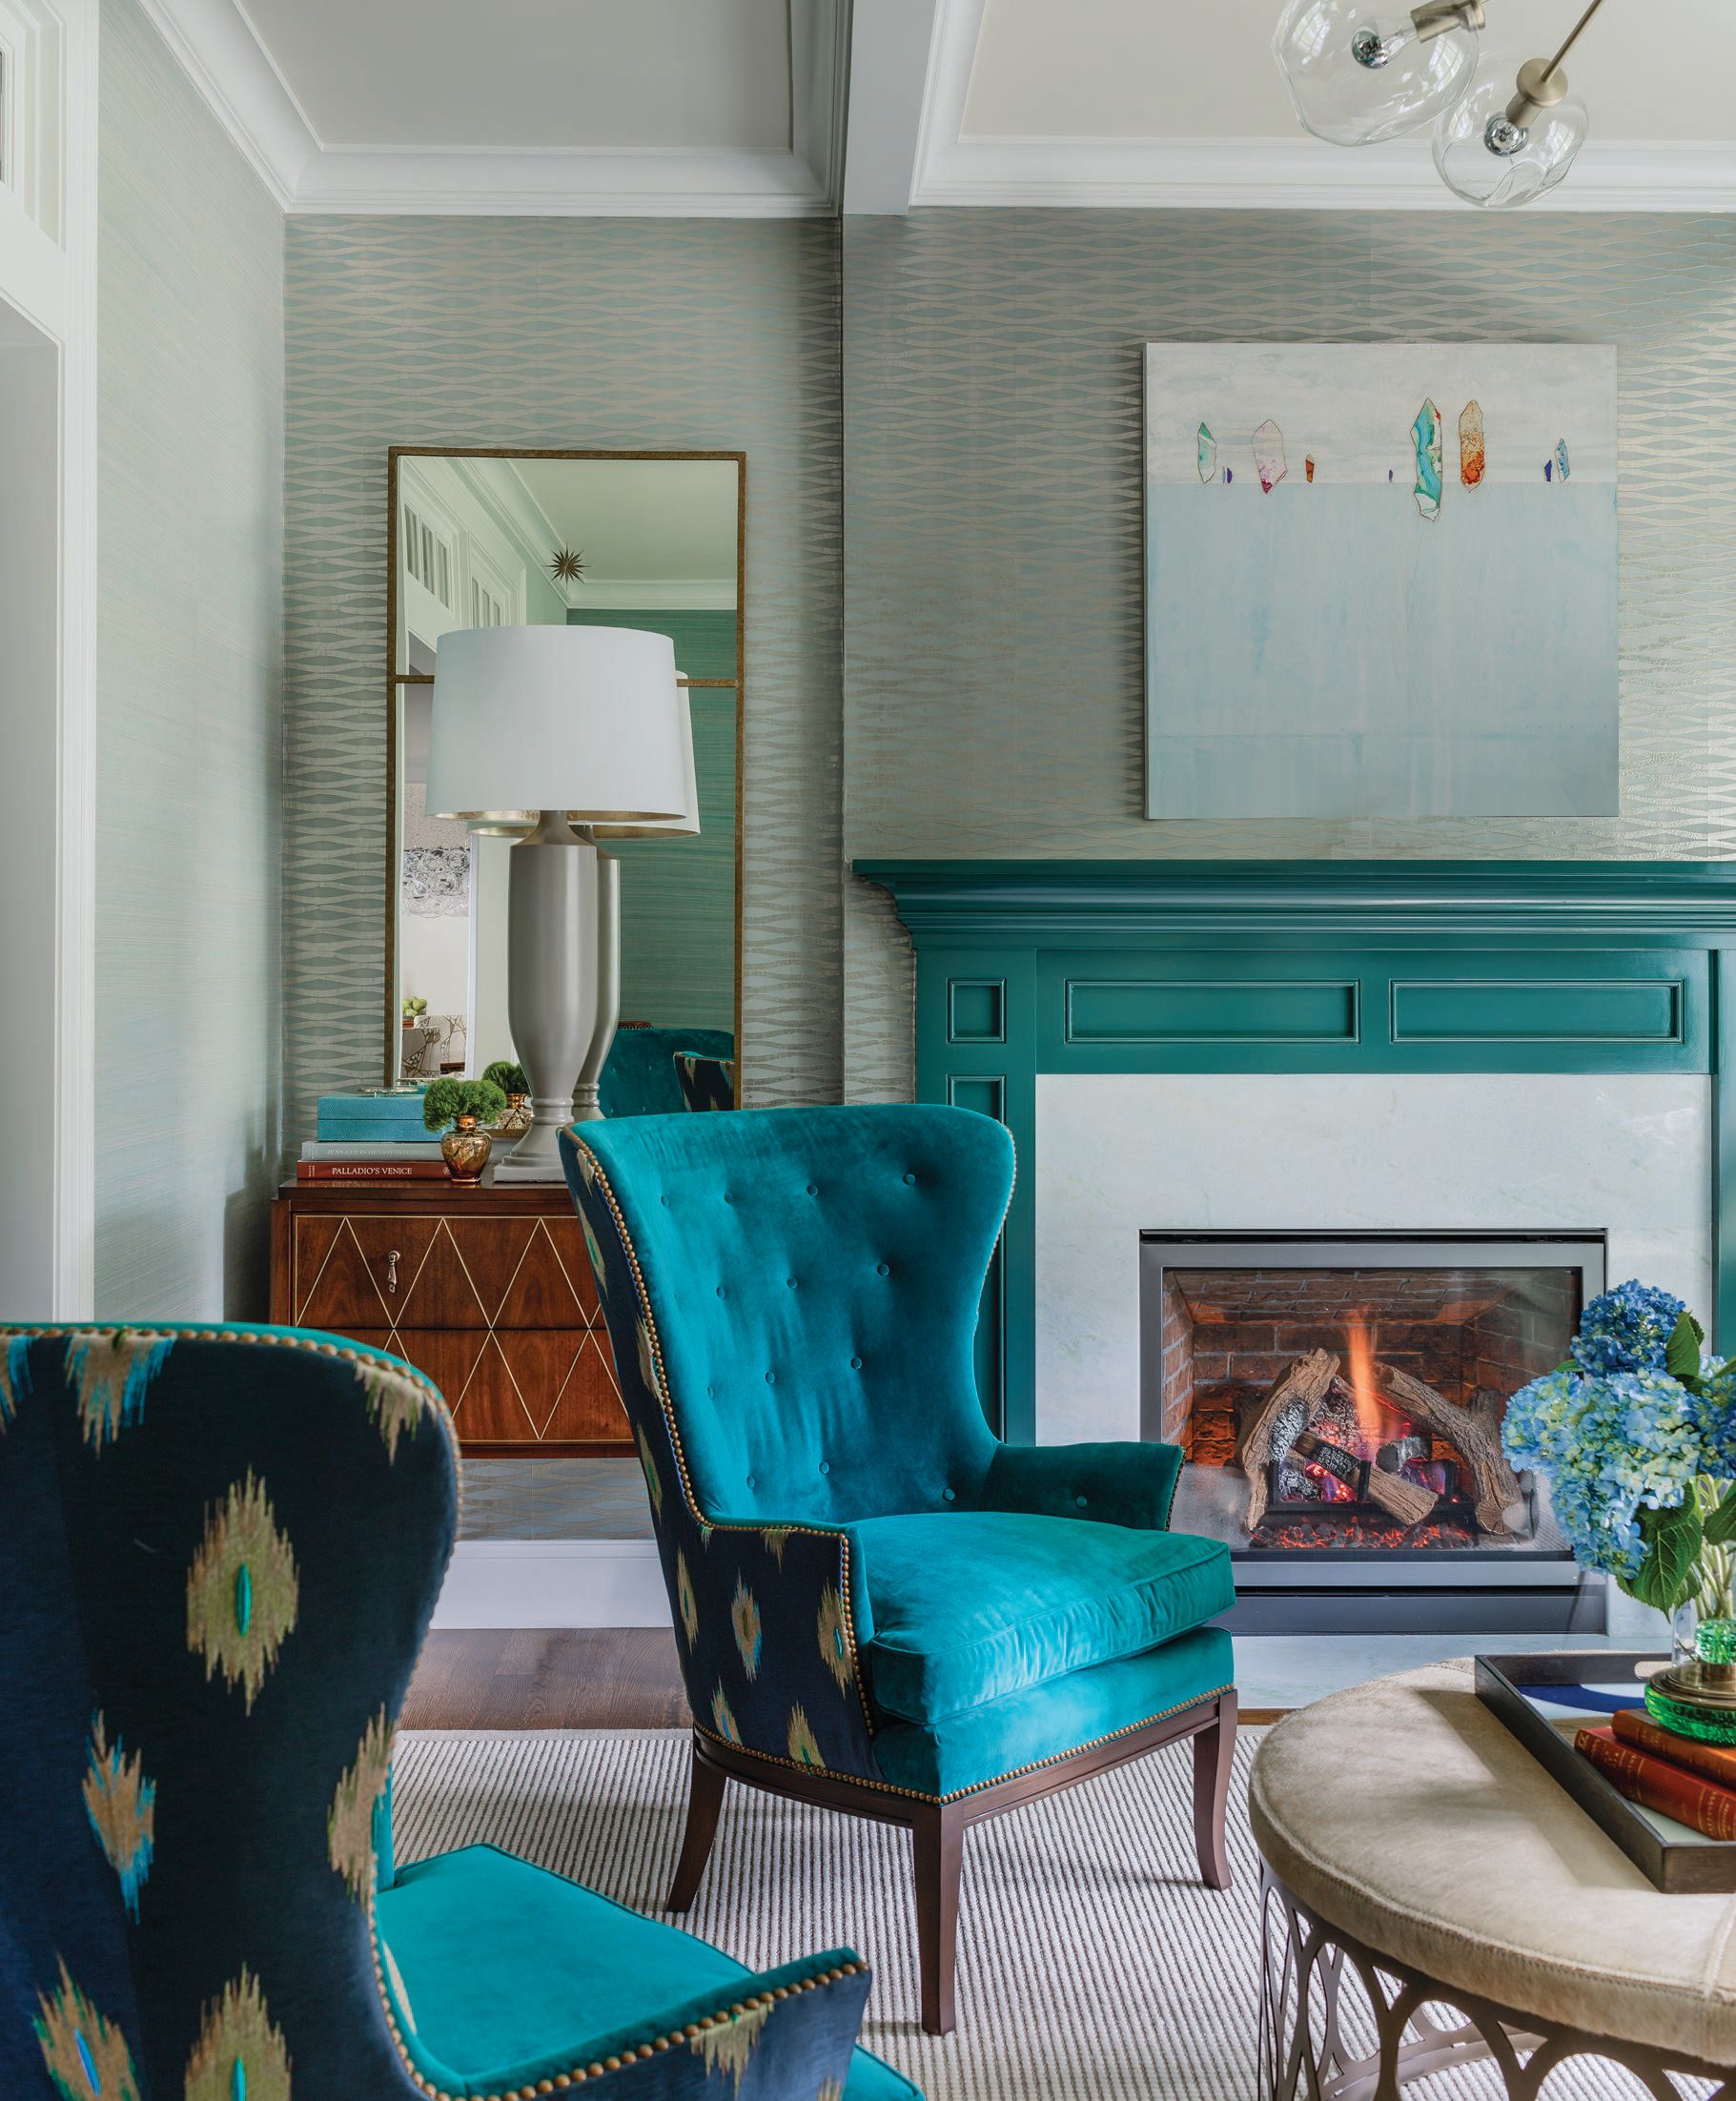 Phillip Jeffries wallpaper adds texture behind the roaring fireplace in the living room, while a simple Jules Place painting lords over the space. Photographed by Michael J. Lee